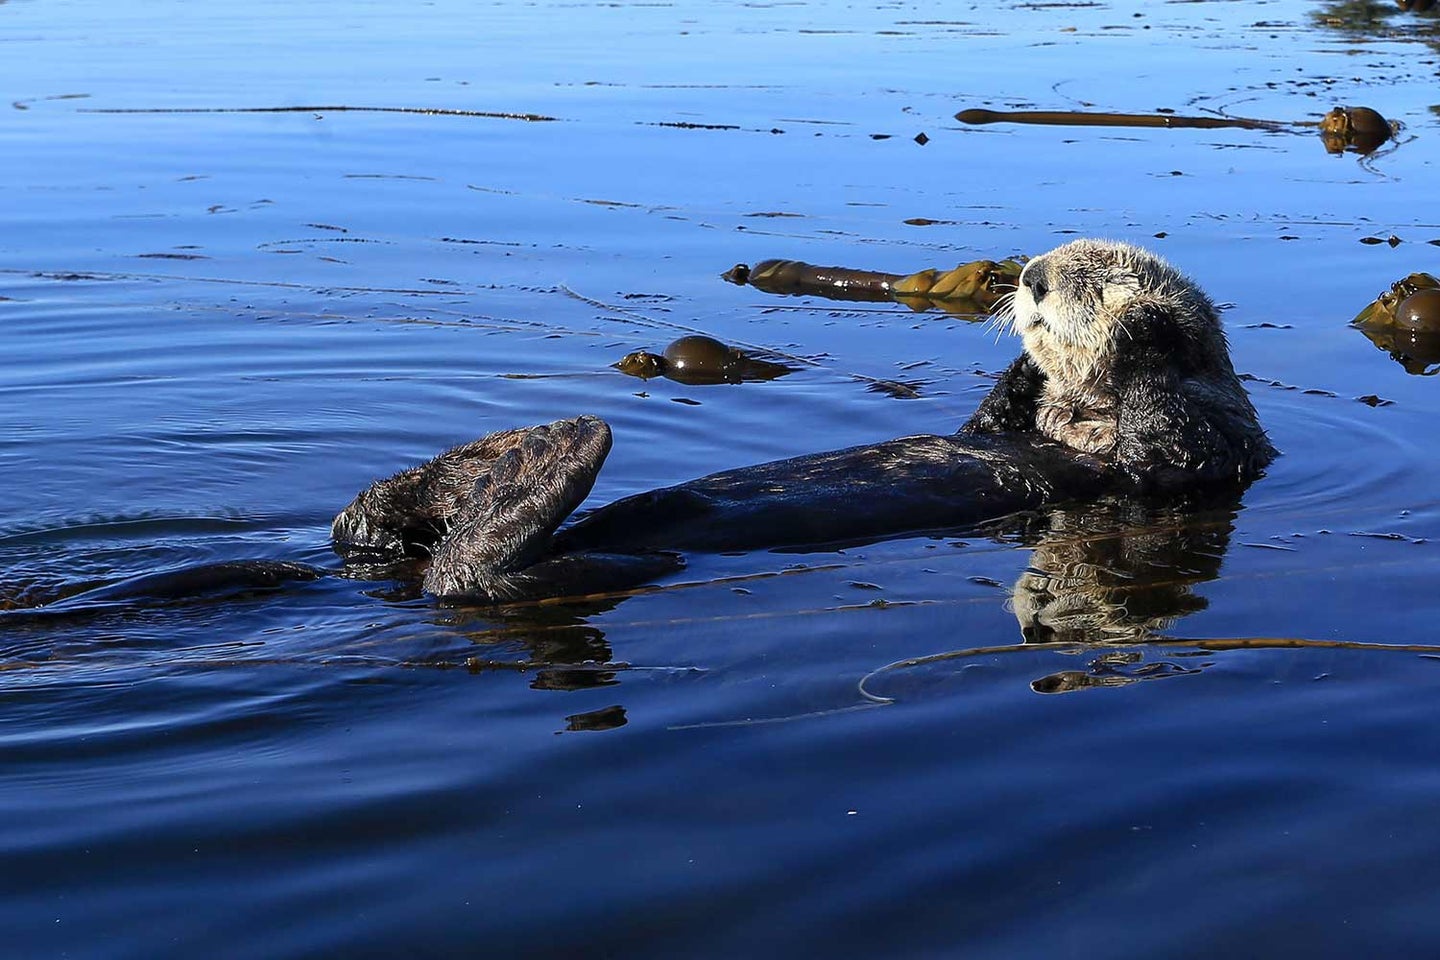 A northern sea otter swims on its back in Kodiak National Wildlife Refuge.